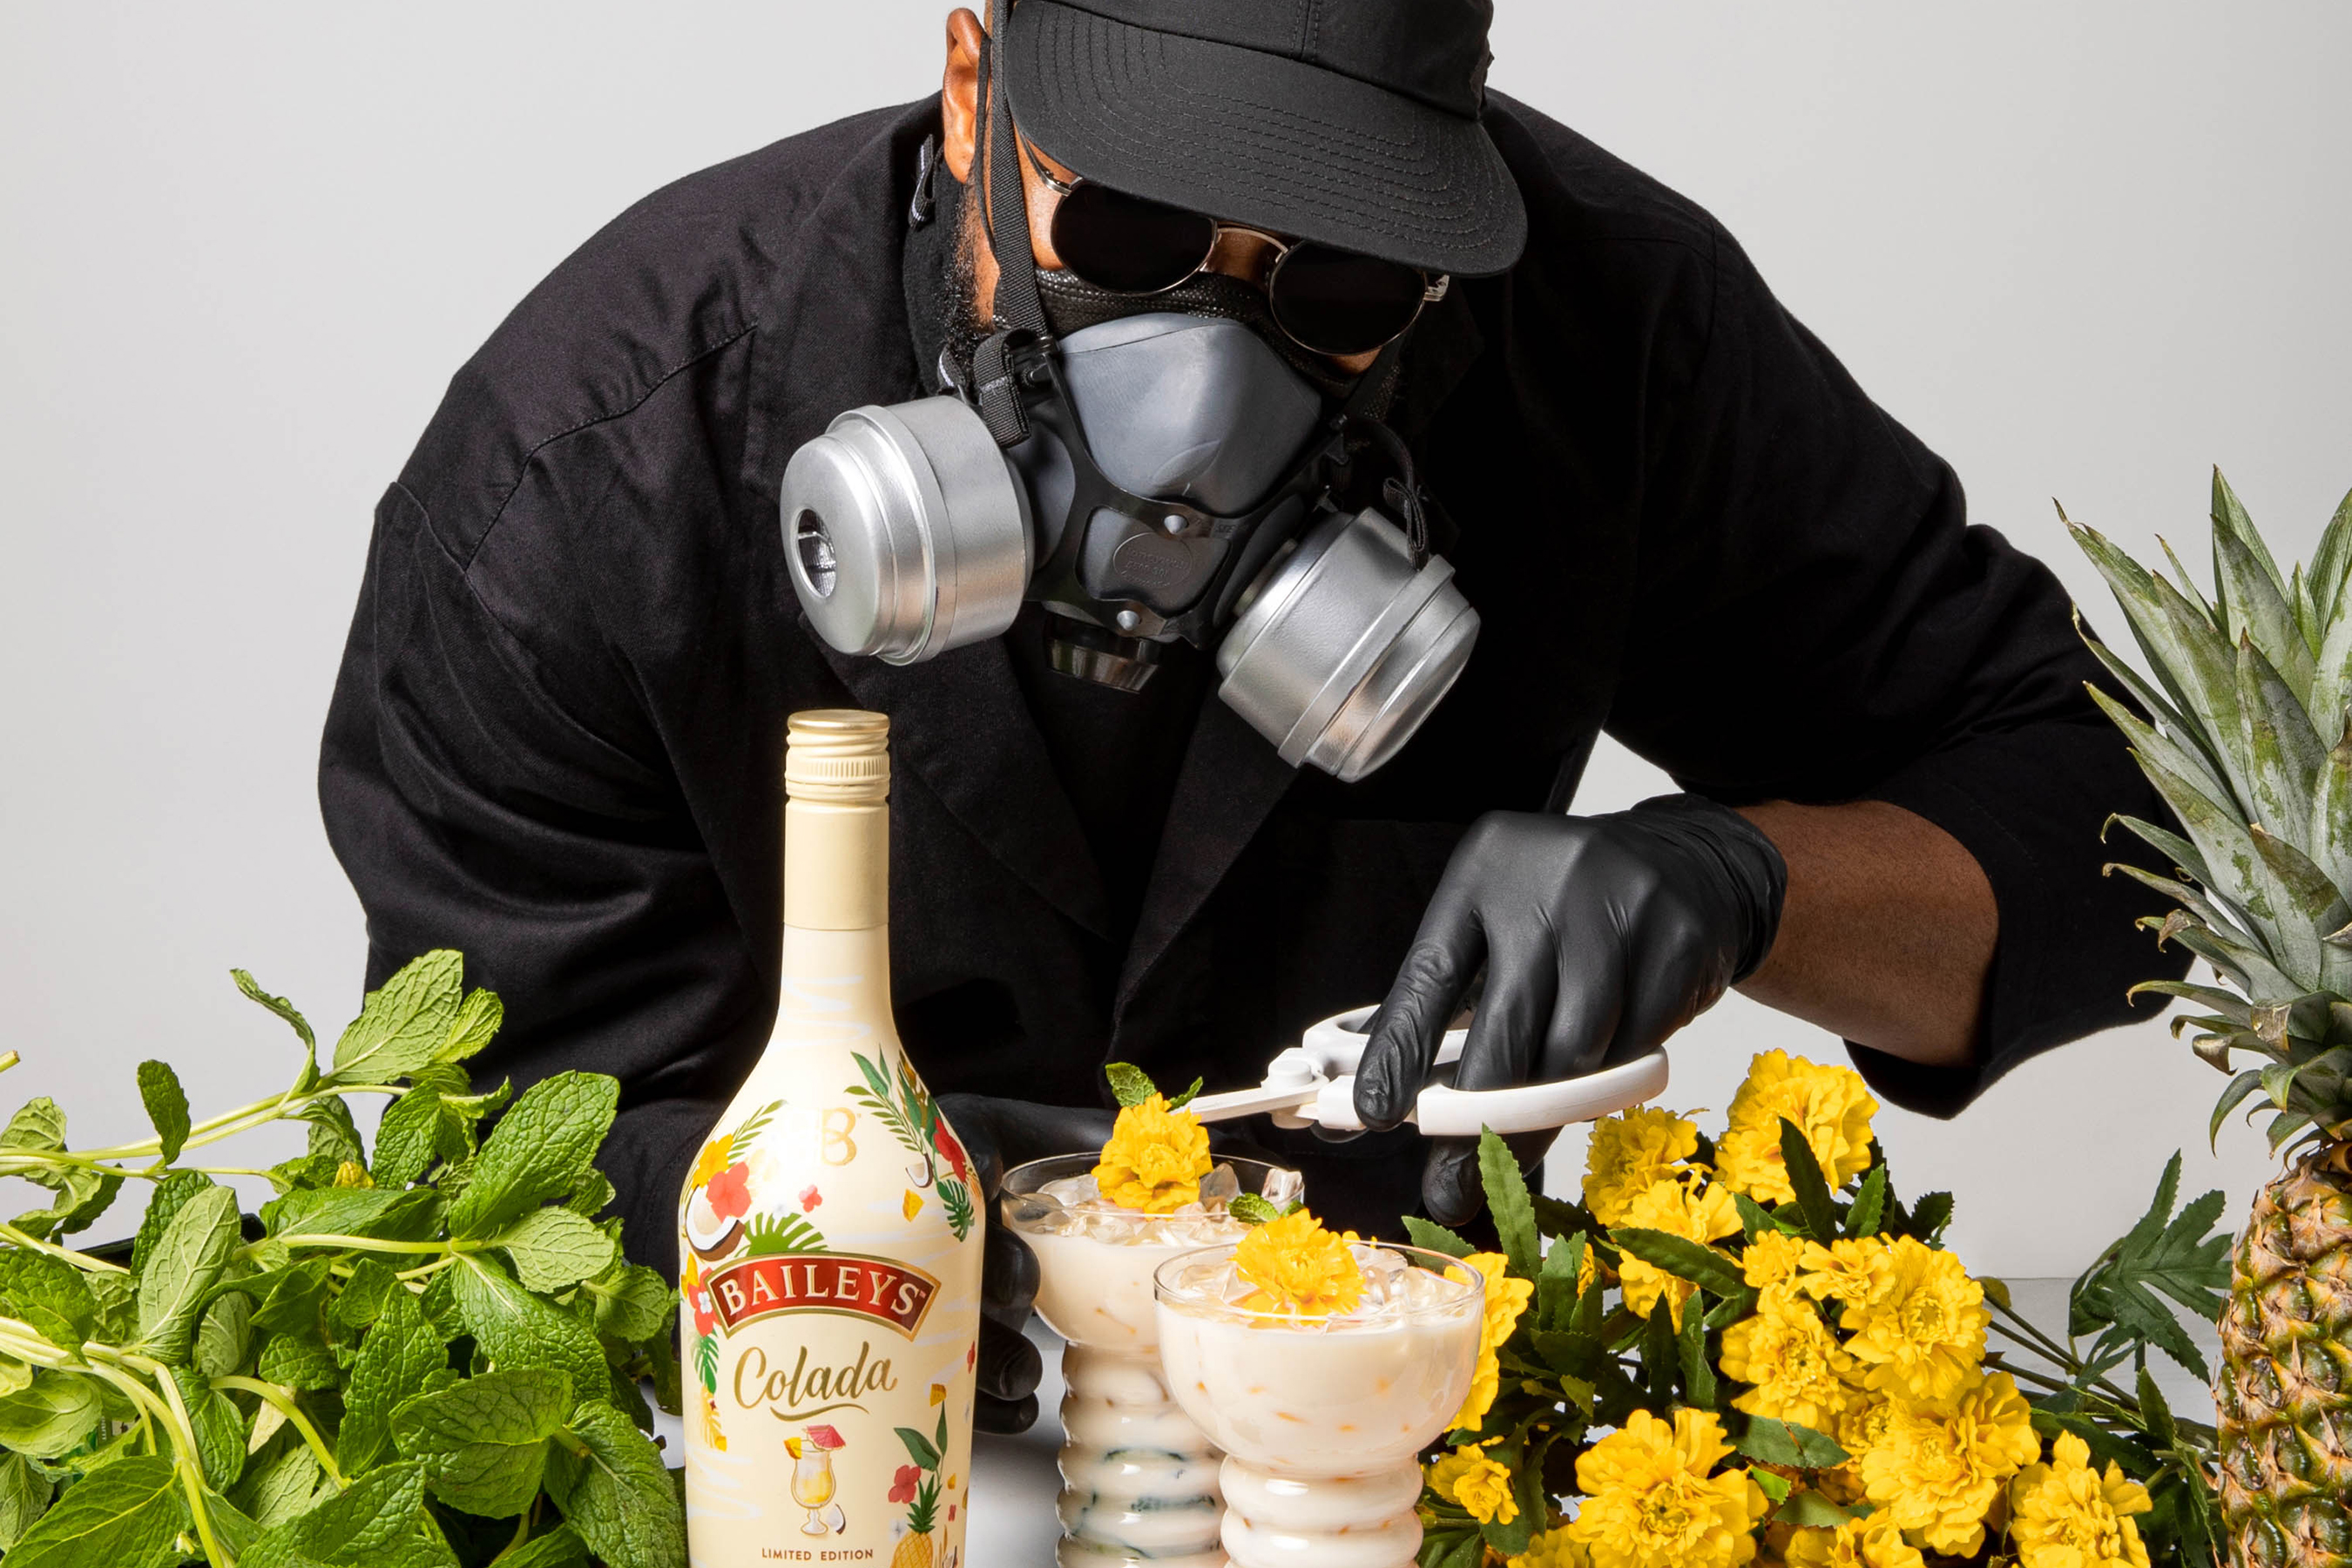 Mr. Flower Fantastic Pairs the Minty Co-La La with an marigold and mint pineapple floral garnish